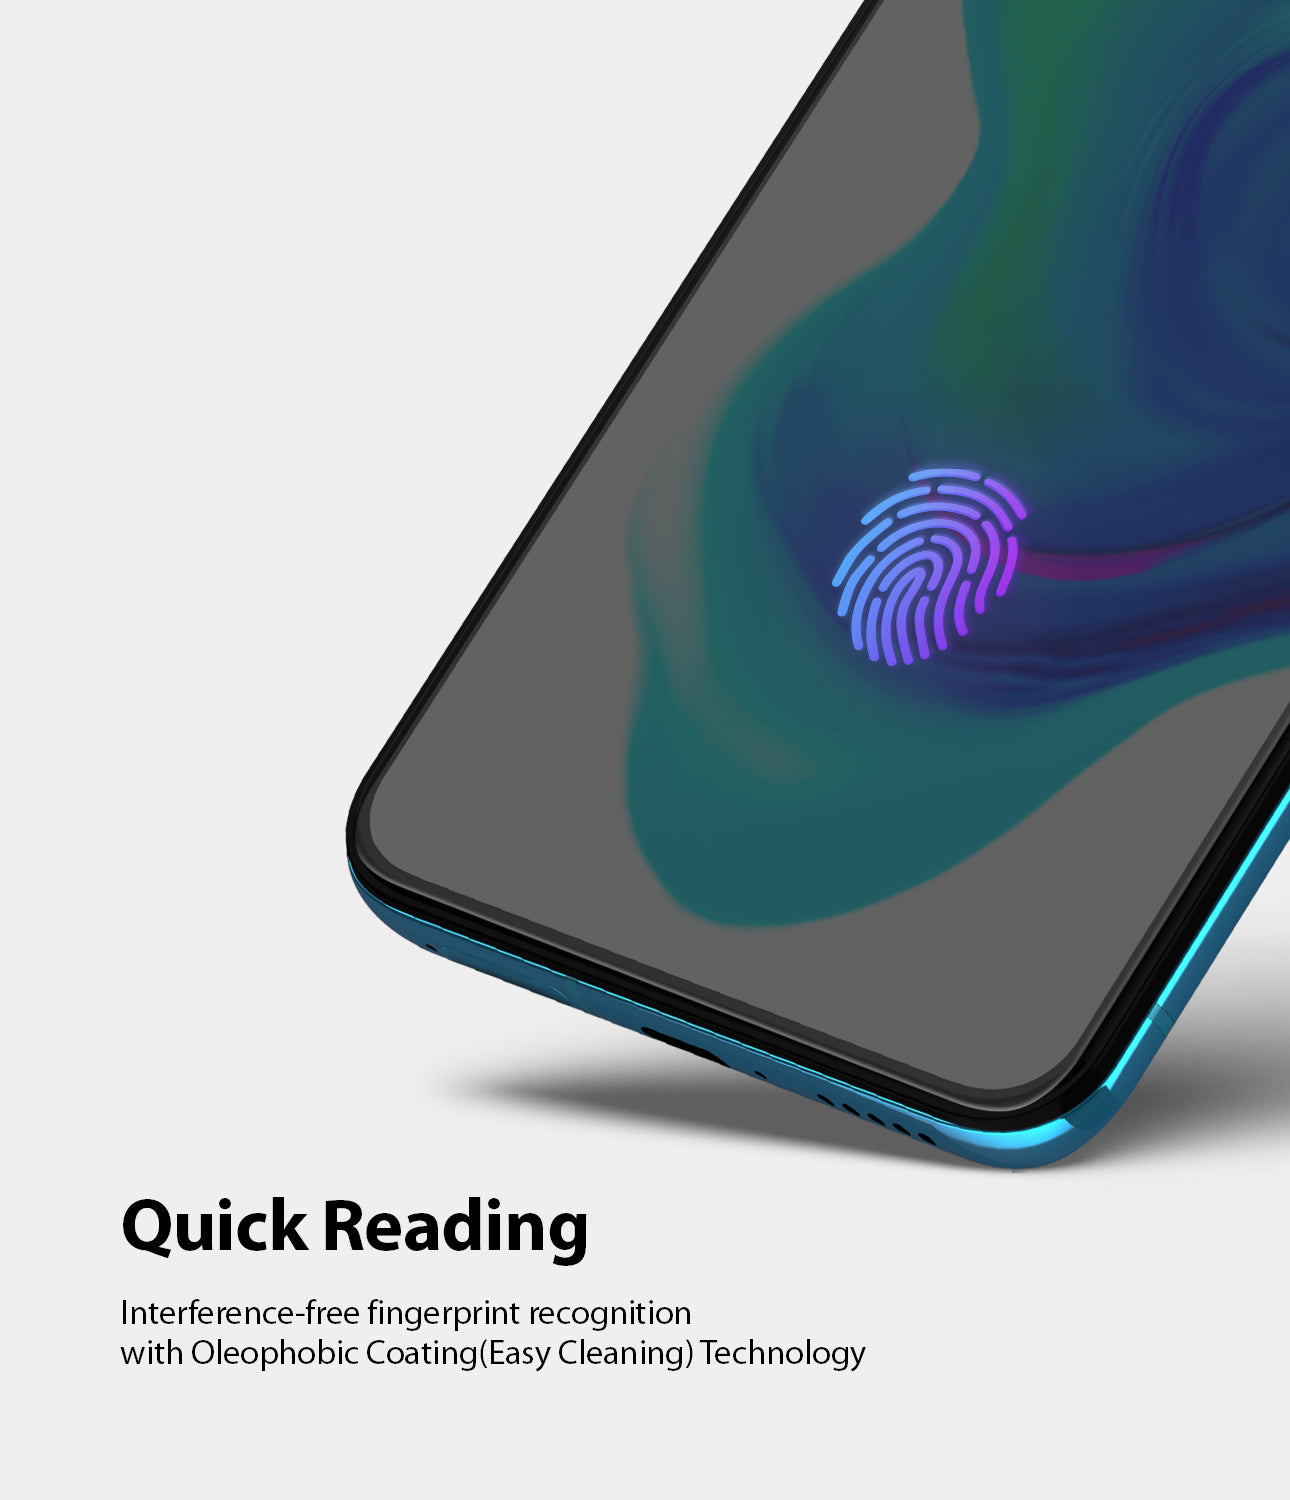 quick reading - interference free fingerprint recognition